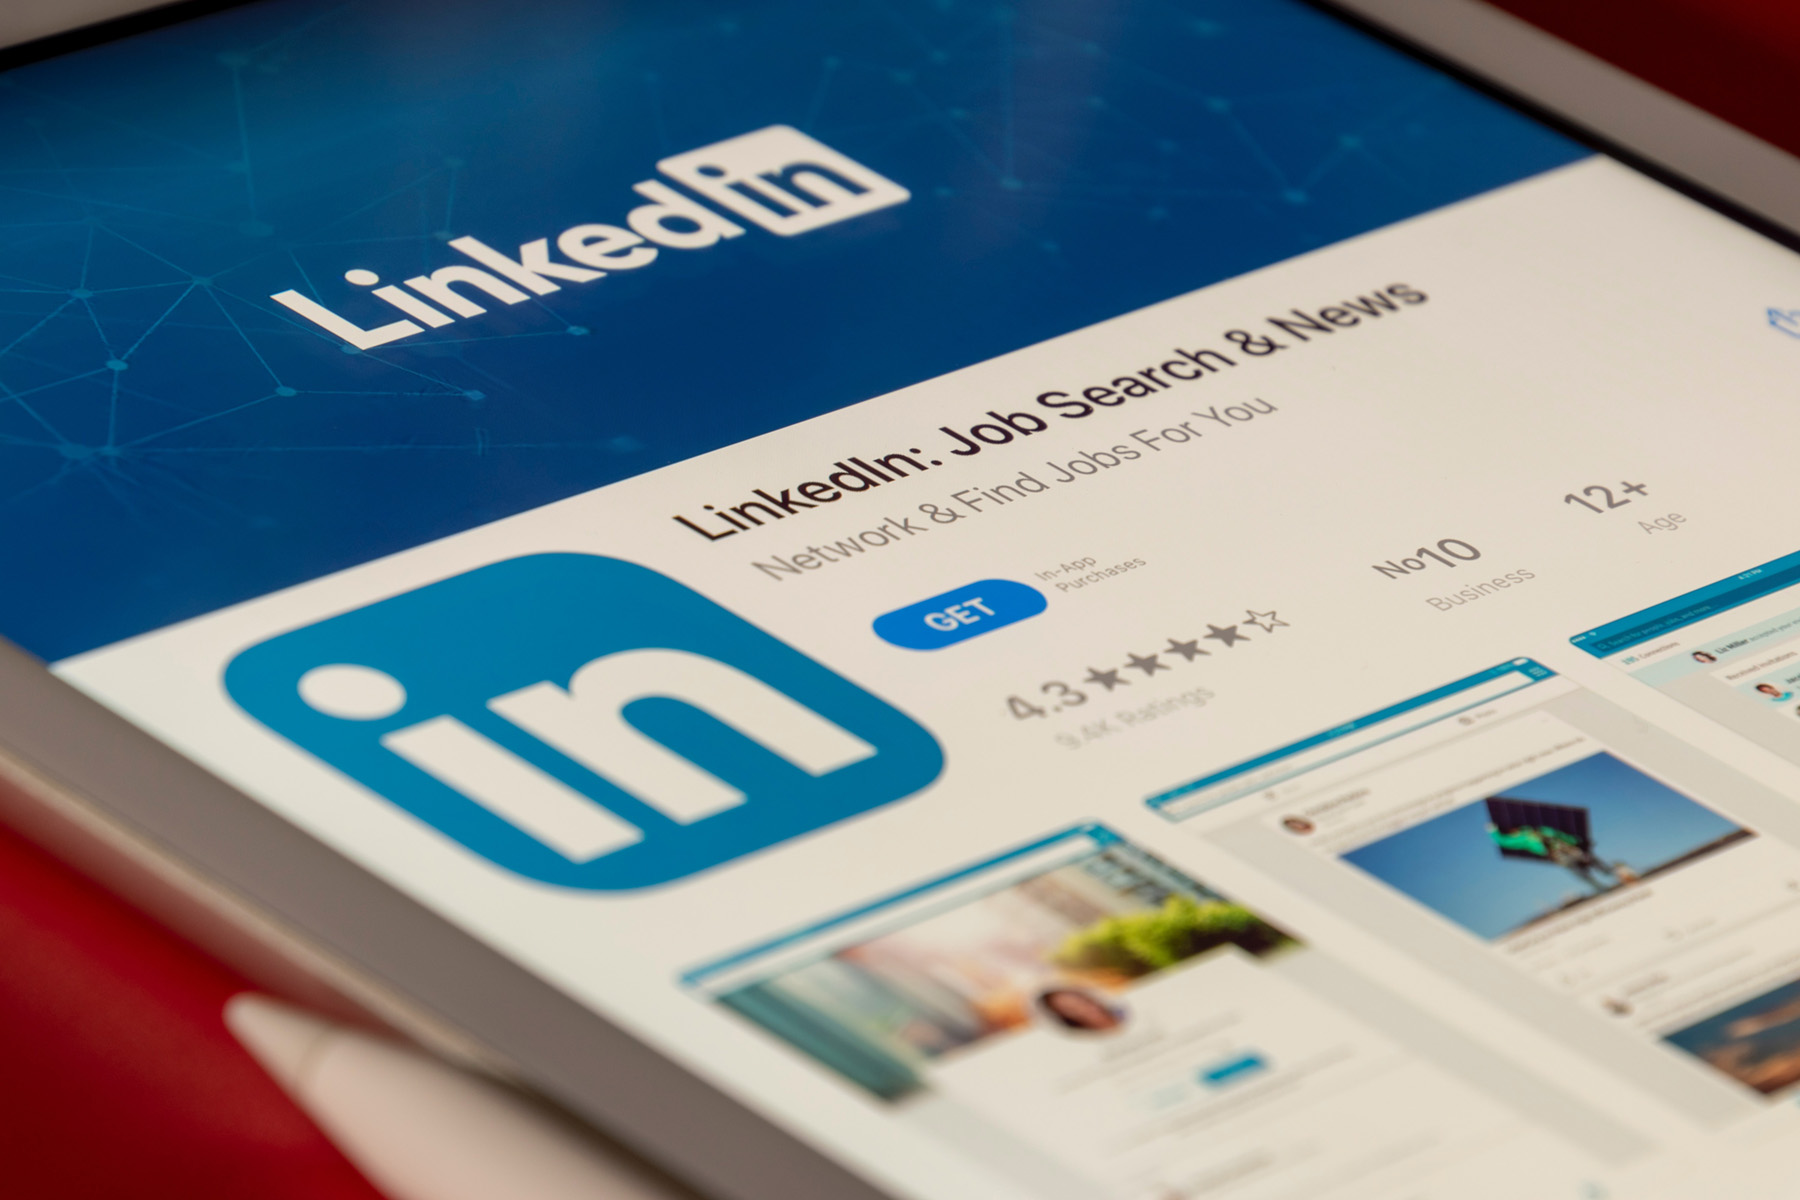 Here you will find few ChatGPT prompts for Linkedin posts that could to improve your visibility and also engagement.